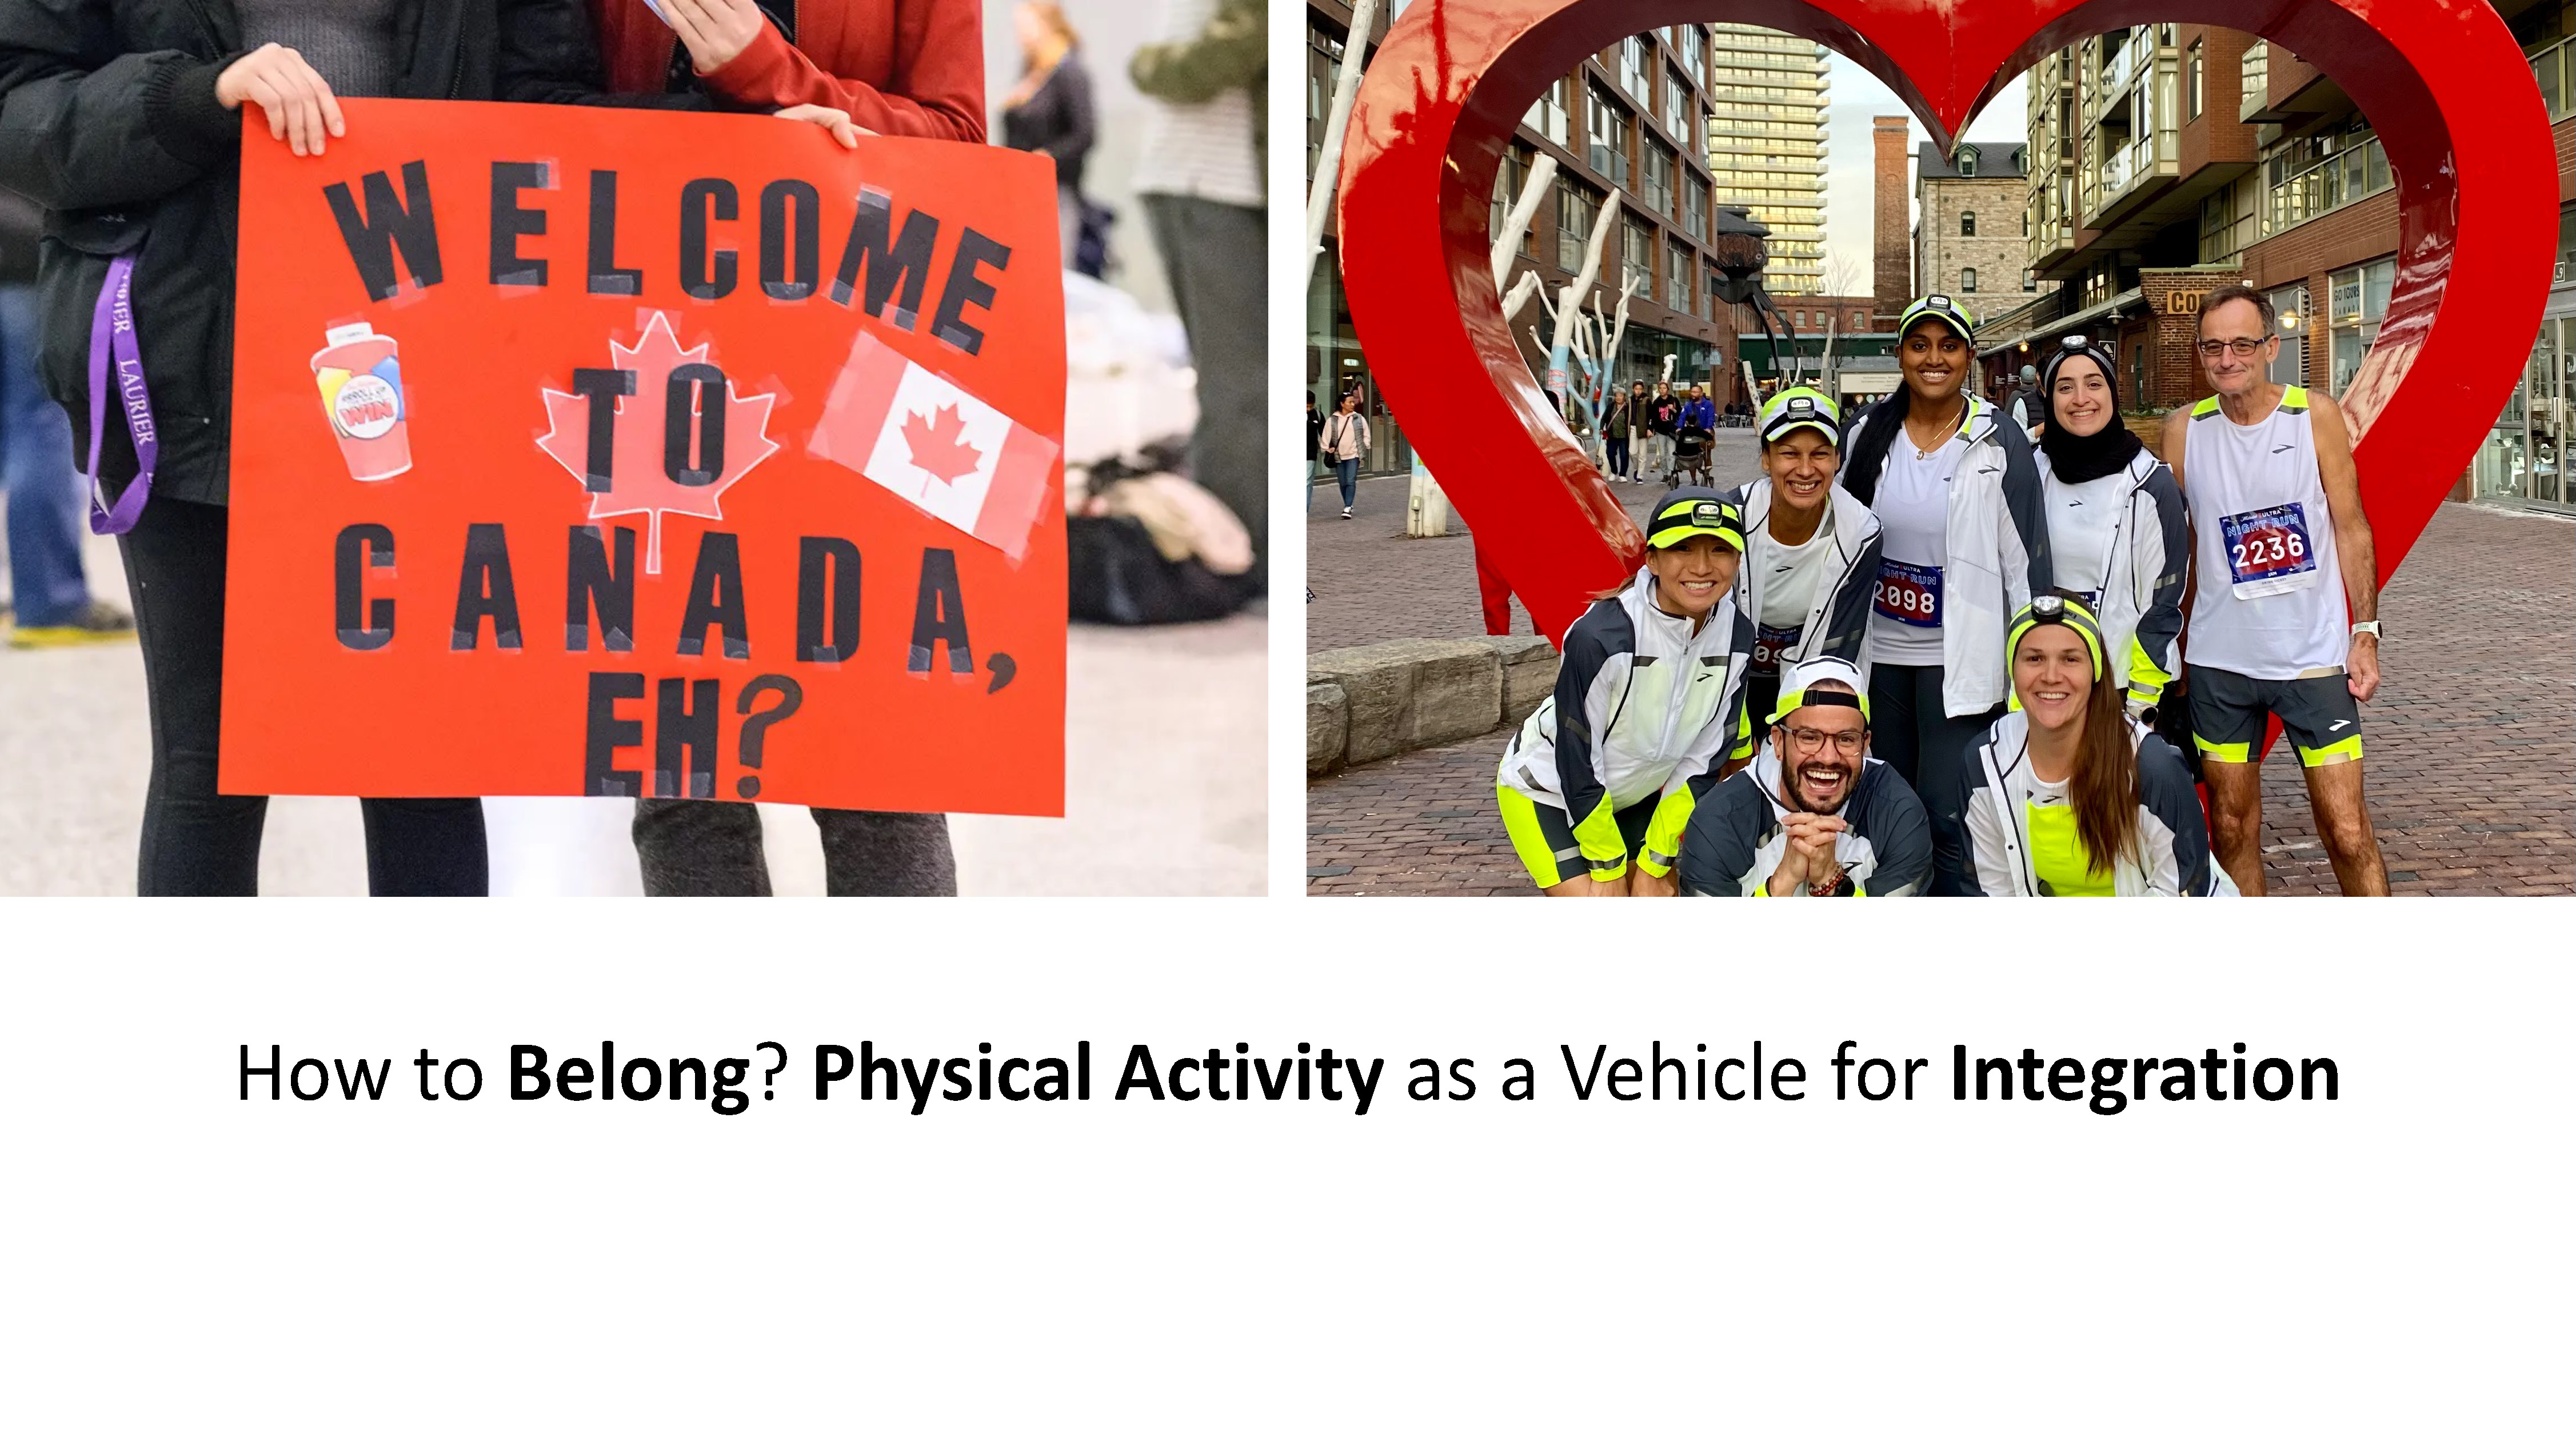 How to Belong? Physical Activity as a Vehicle for Integration